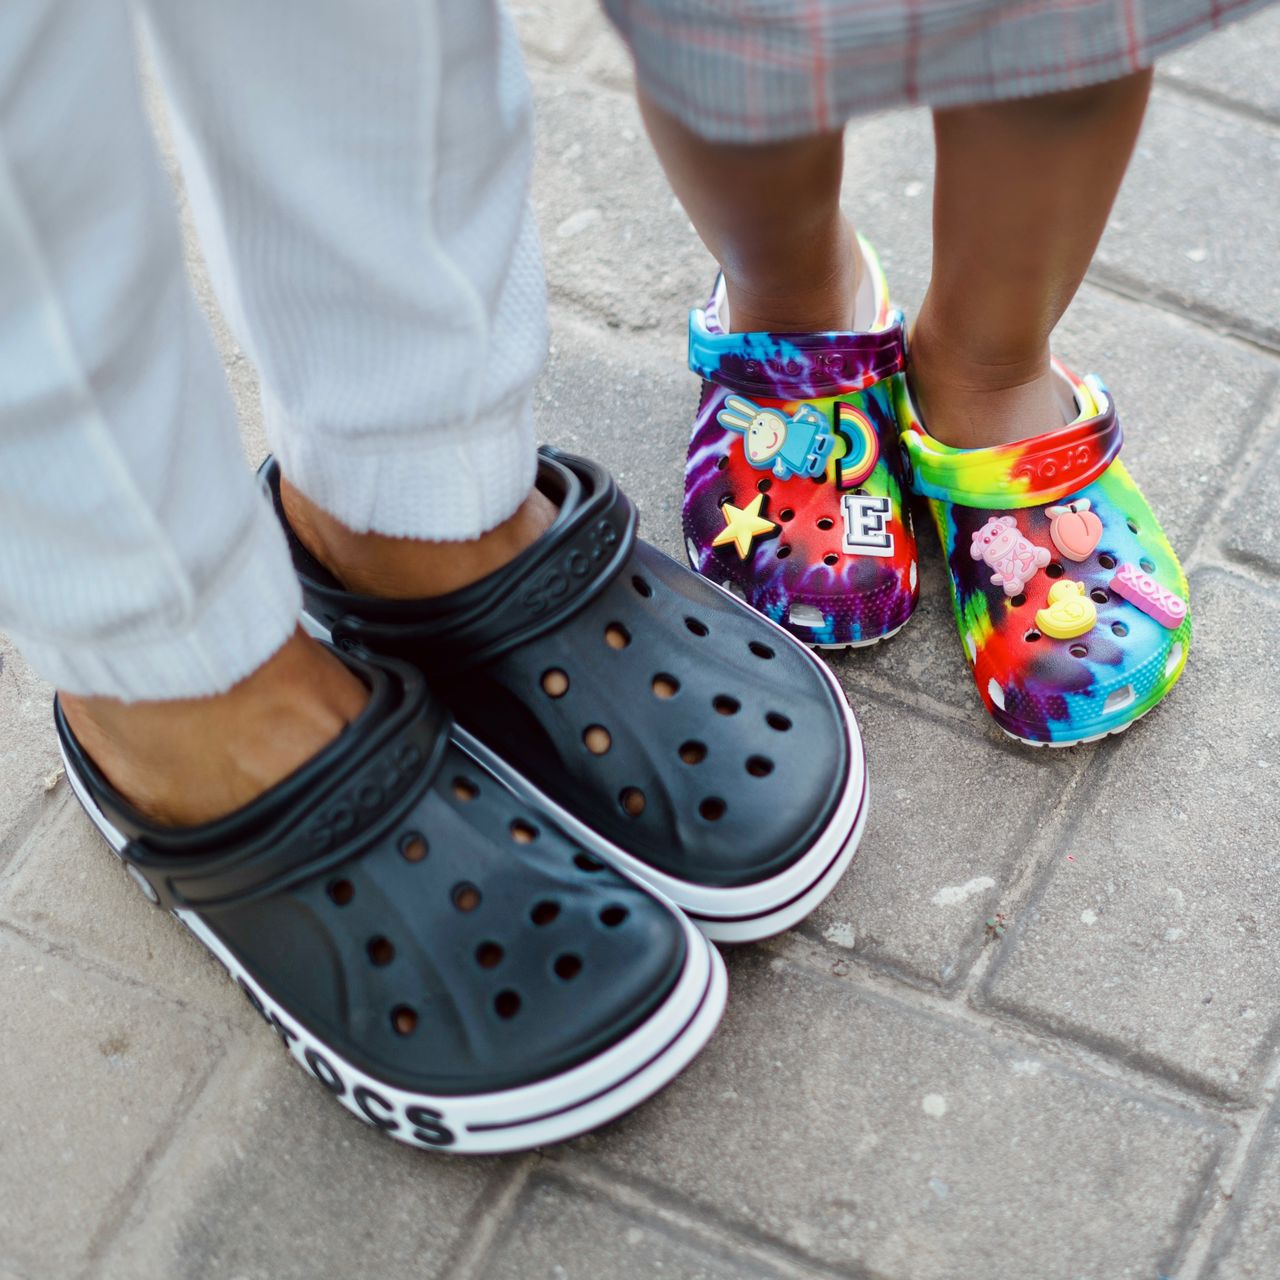 Crocs share about their current back-to-school campaign and why Crocs Classics are a must-have for Spring